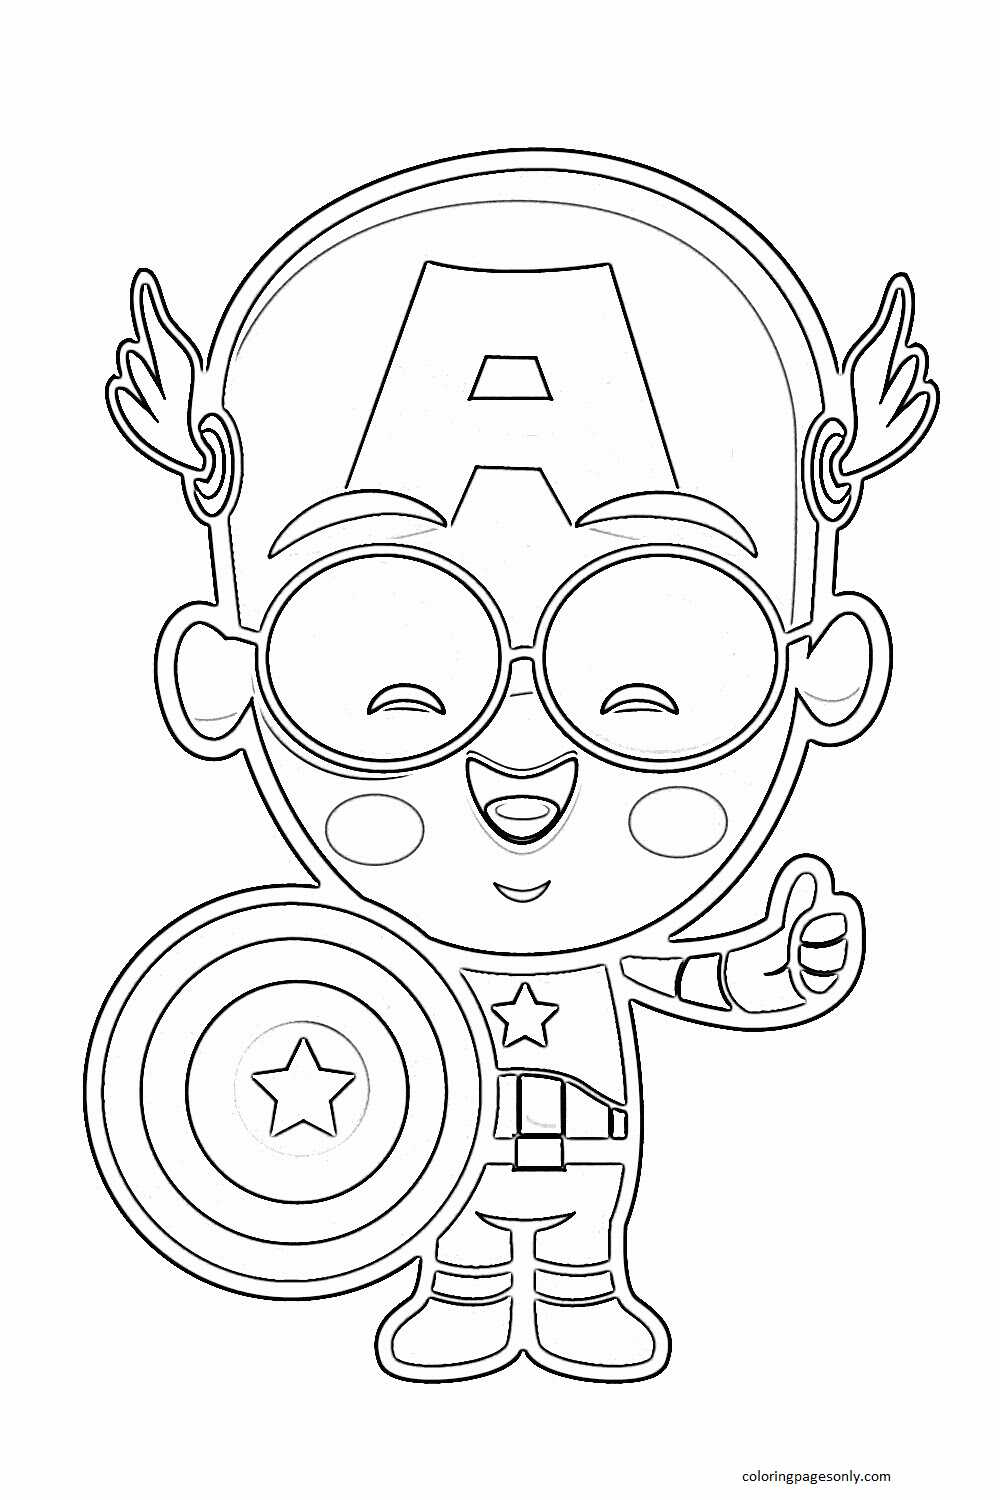 Cartoon Avengers Captain America Coloring Pages   Captain America ...